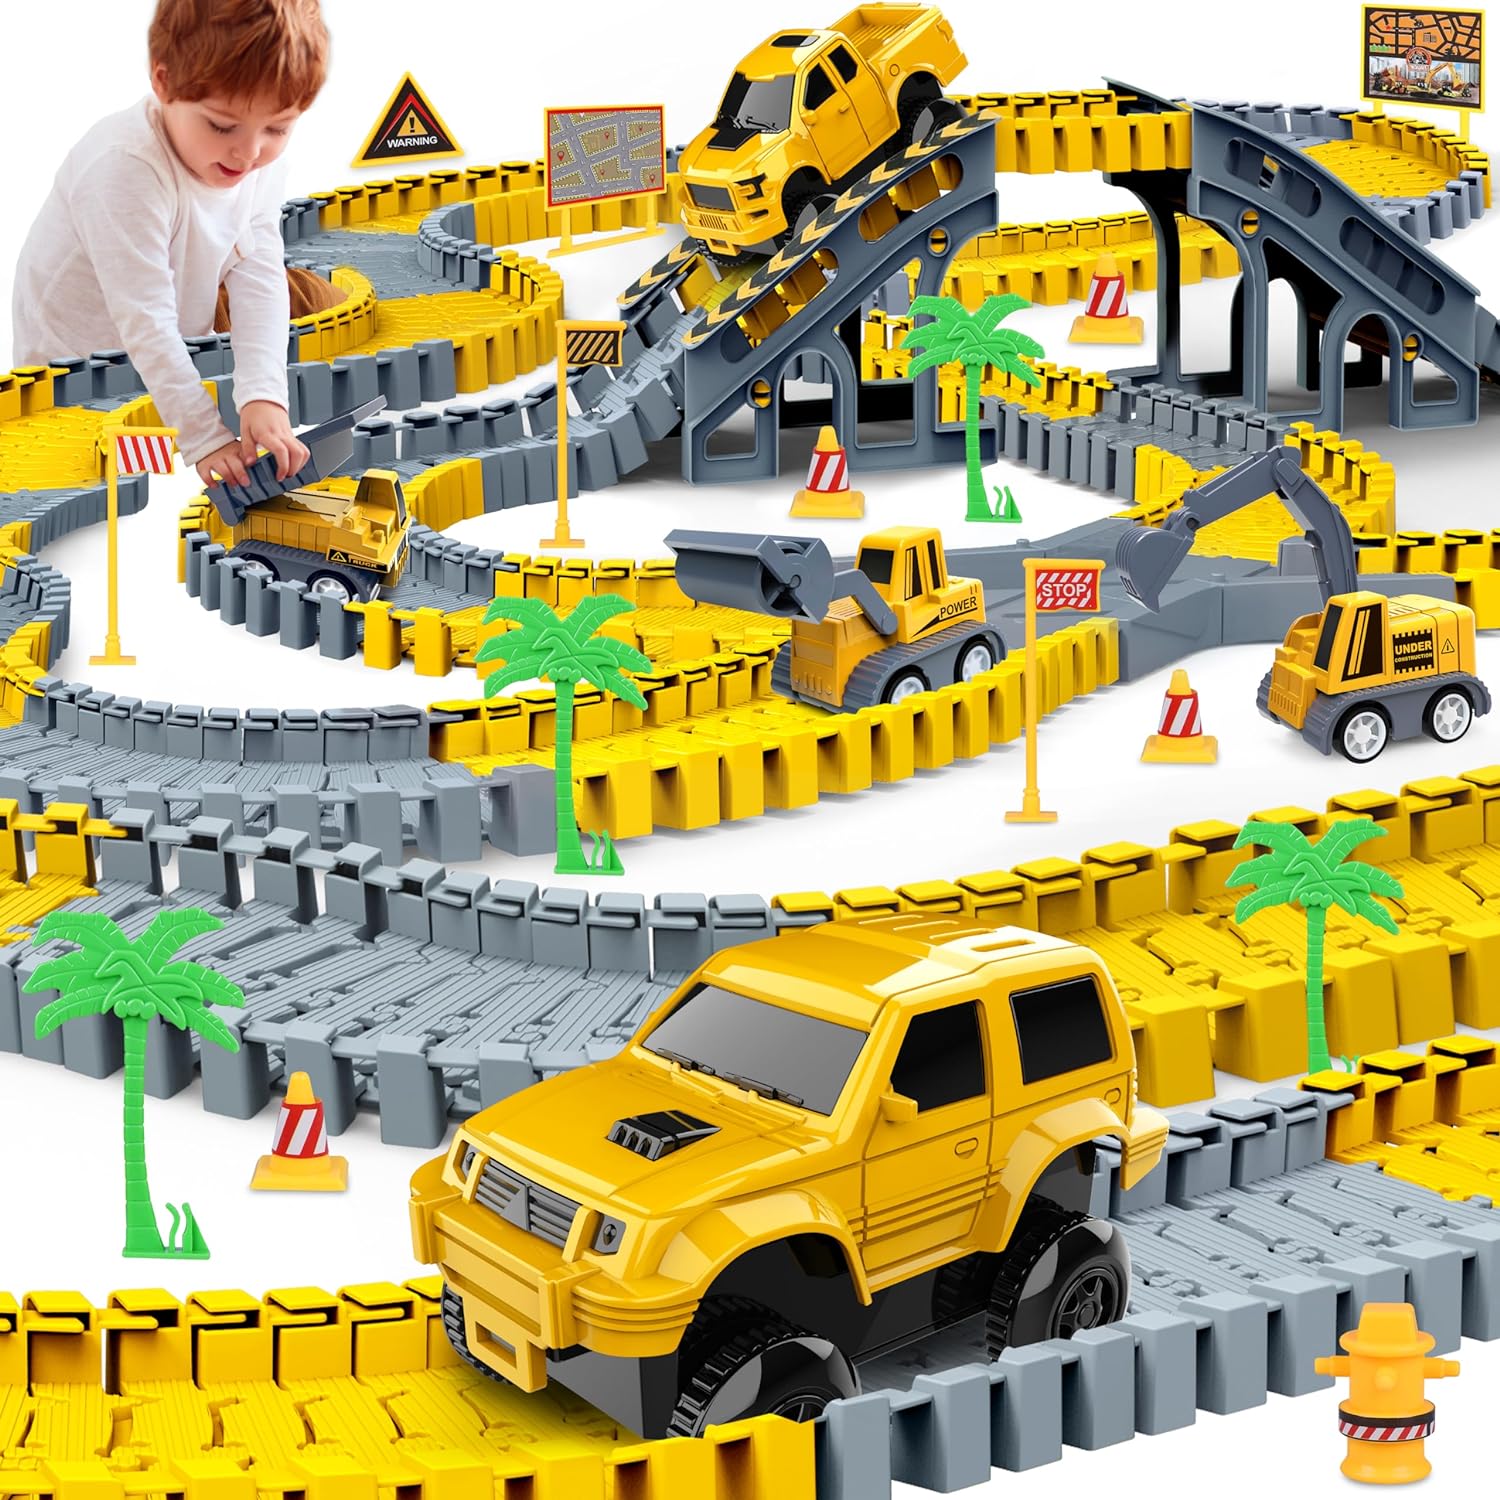 You are currently viewing Kids Construction Toys 253 PCS Race Tracks Toy Review